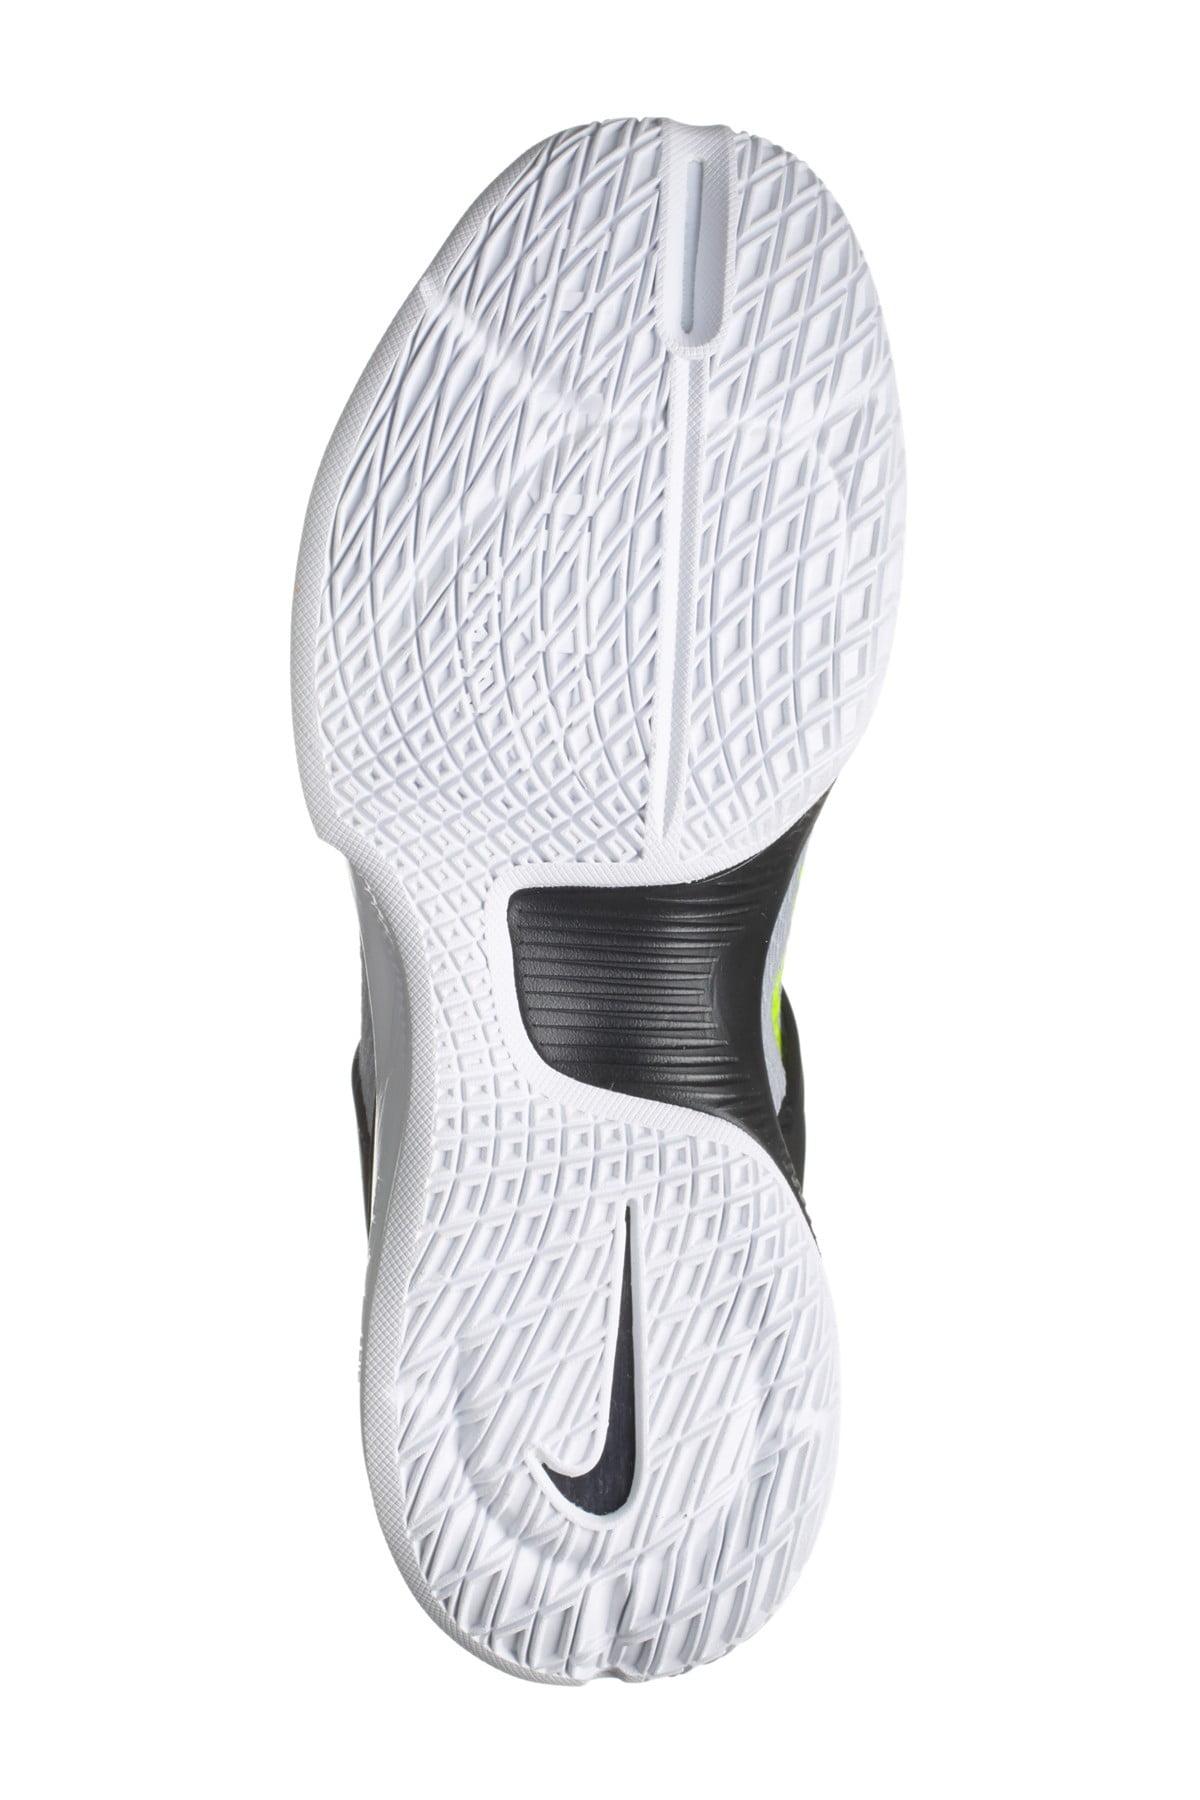 Nike Synthetic Air Zoom Hyperattack Volleyball Shoe in Gray - Lyst